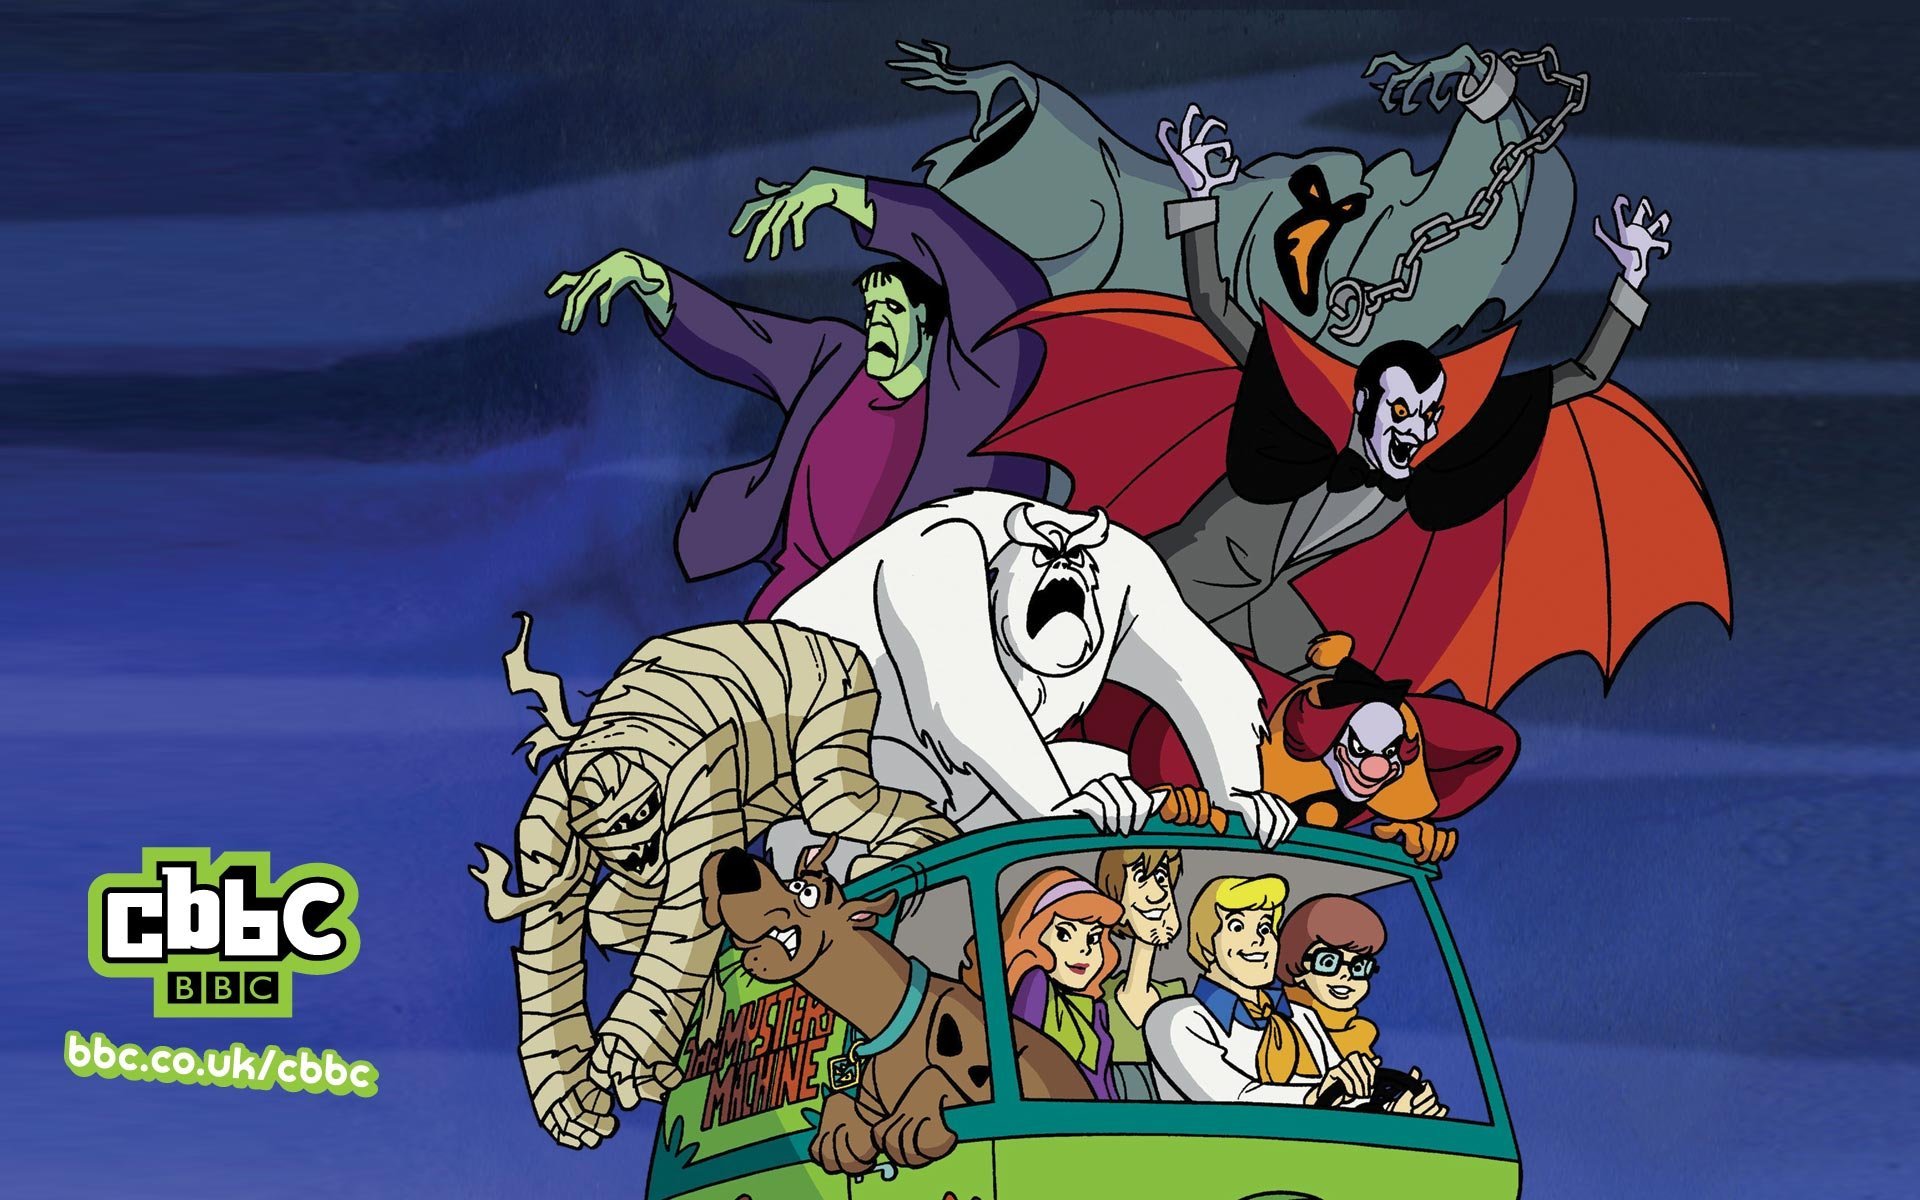 Whats New Scooby Doo Scooby and Gang Wallpaper 1920x1200